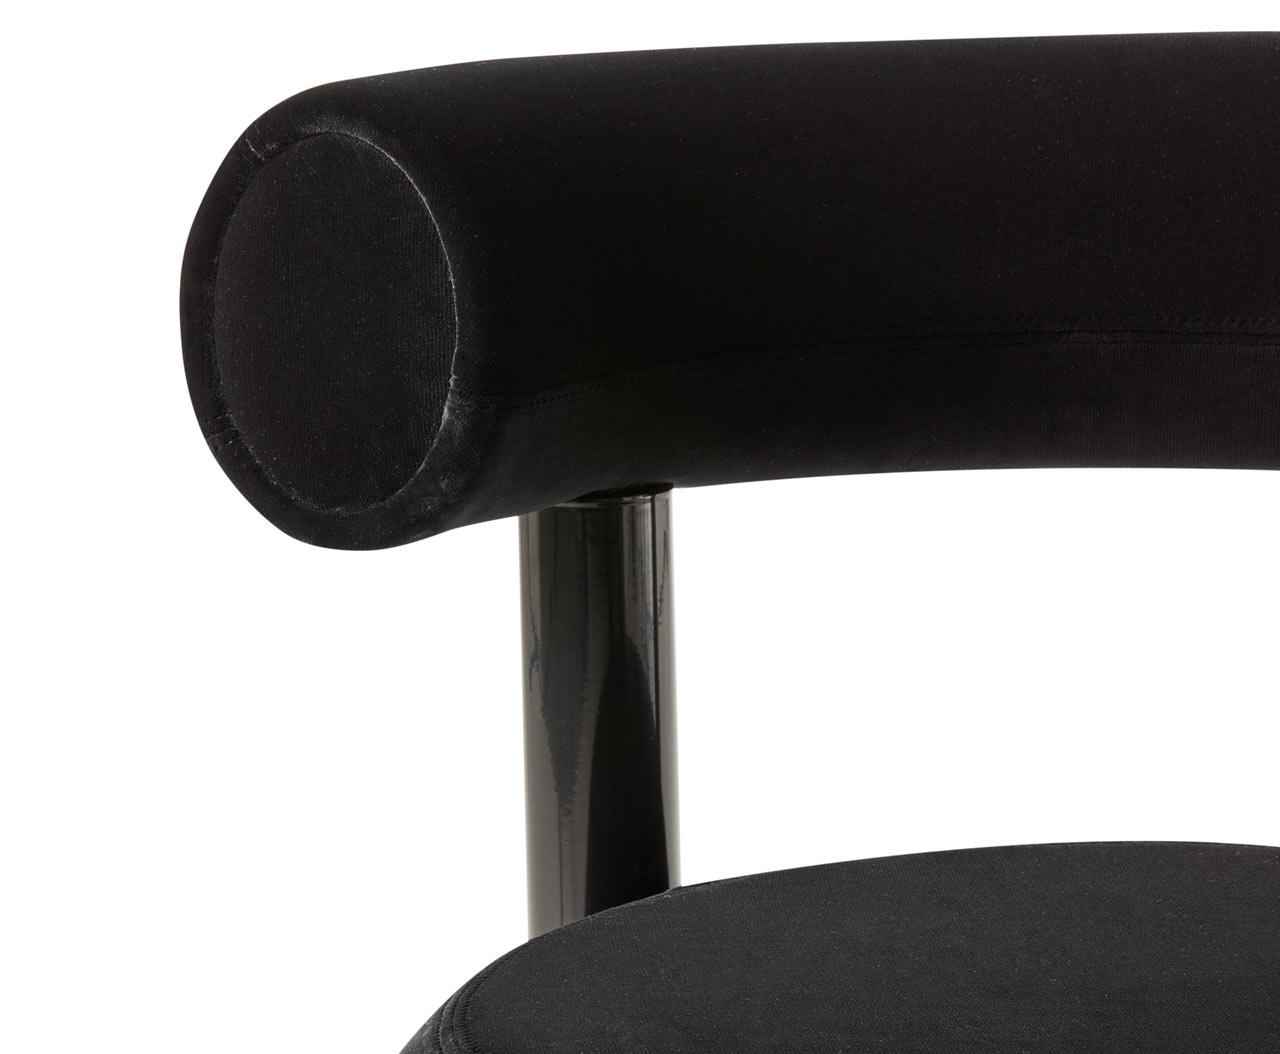 A few of the minimalist plush chairs featured in Tom Dion's new "FAT" furniture collection.